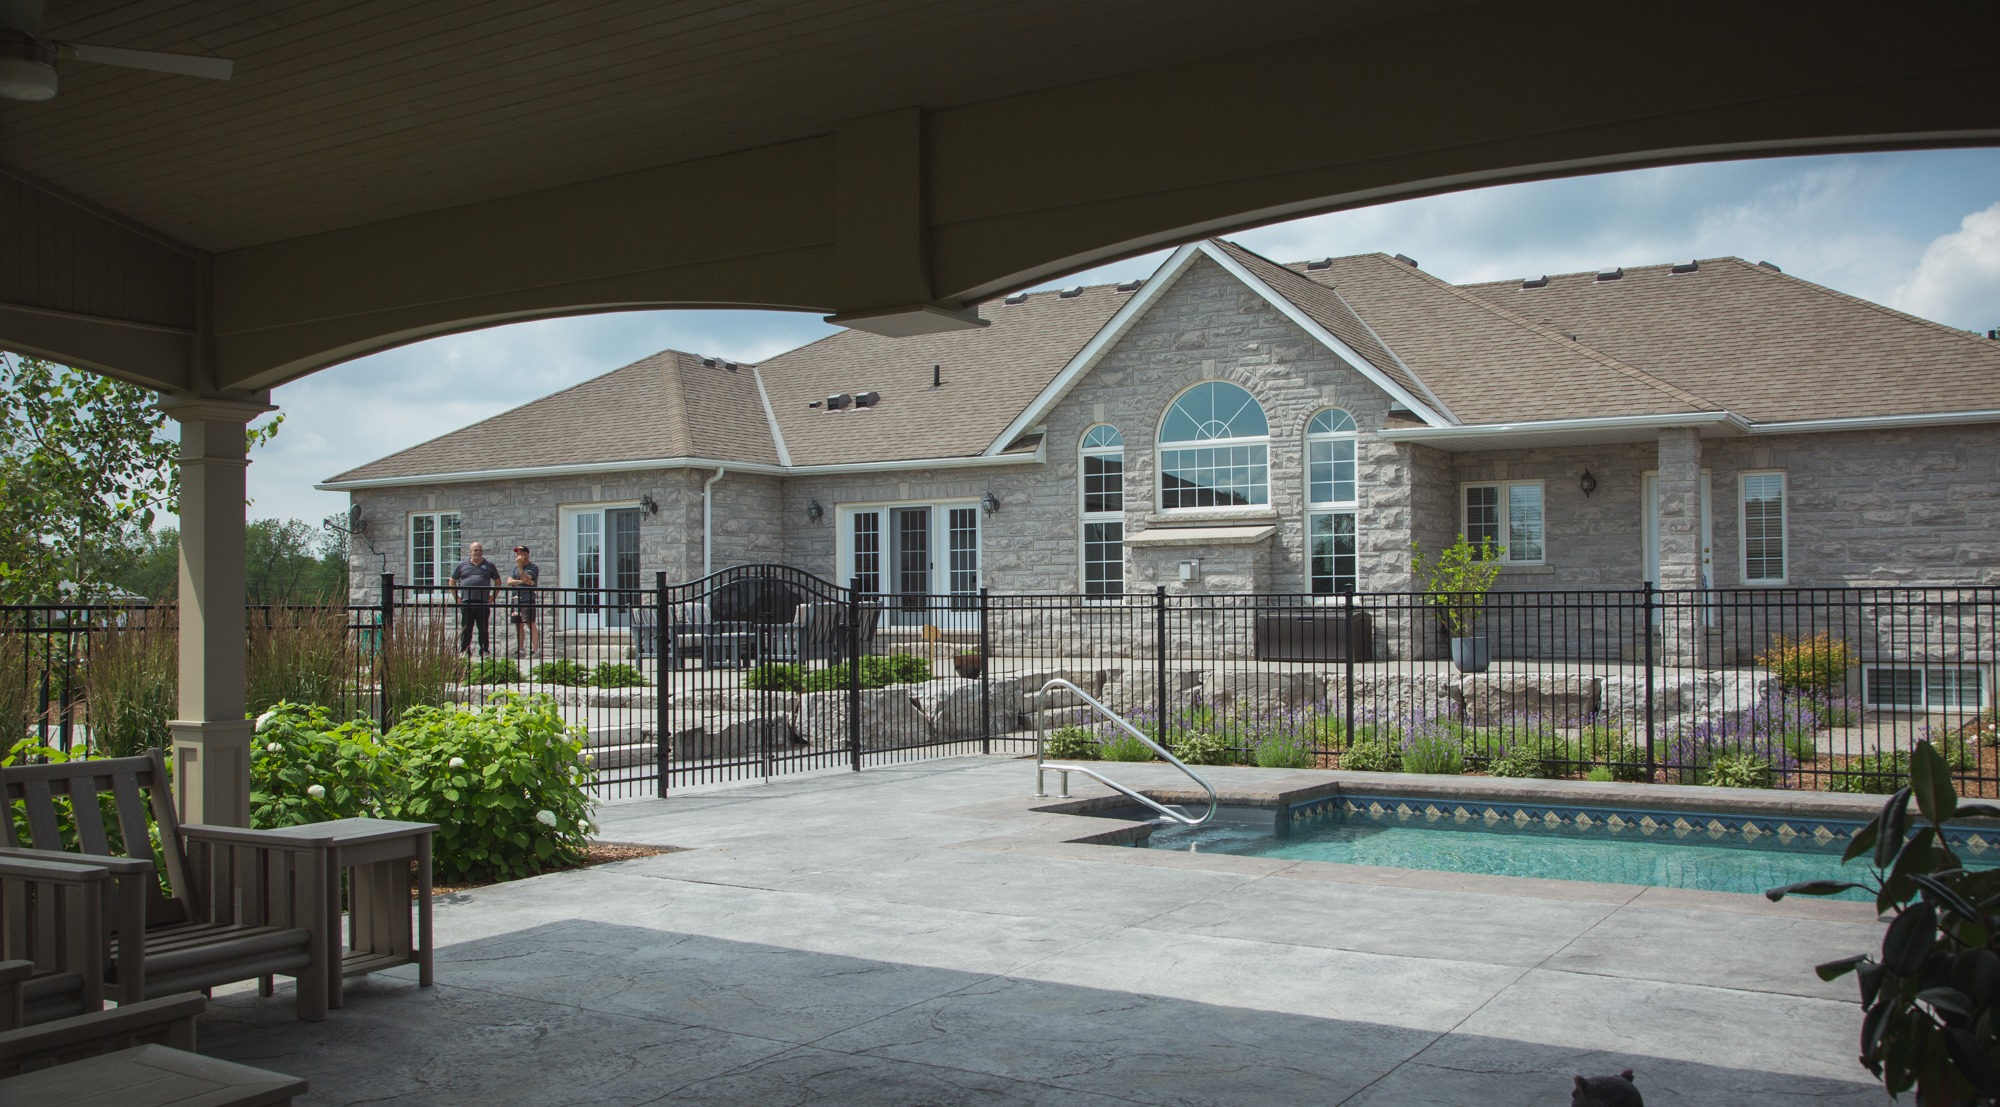 The image shows a stone house with large windows, a covered patio with seating, and a fenced pool area. Two people stand by the railing, chatting.